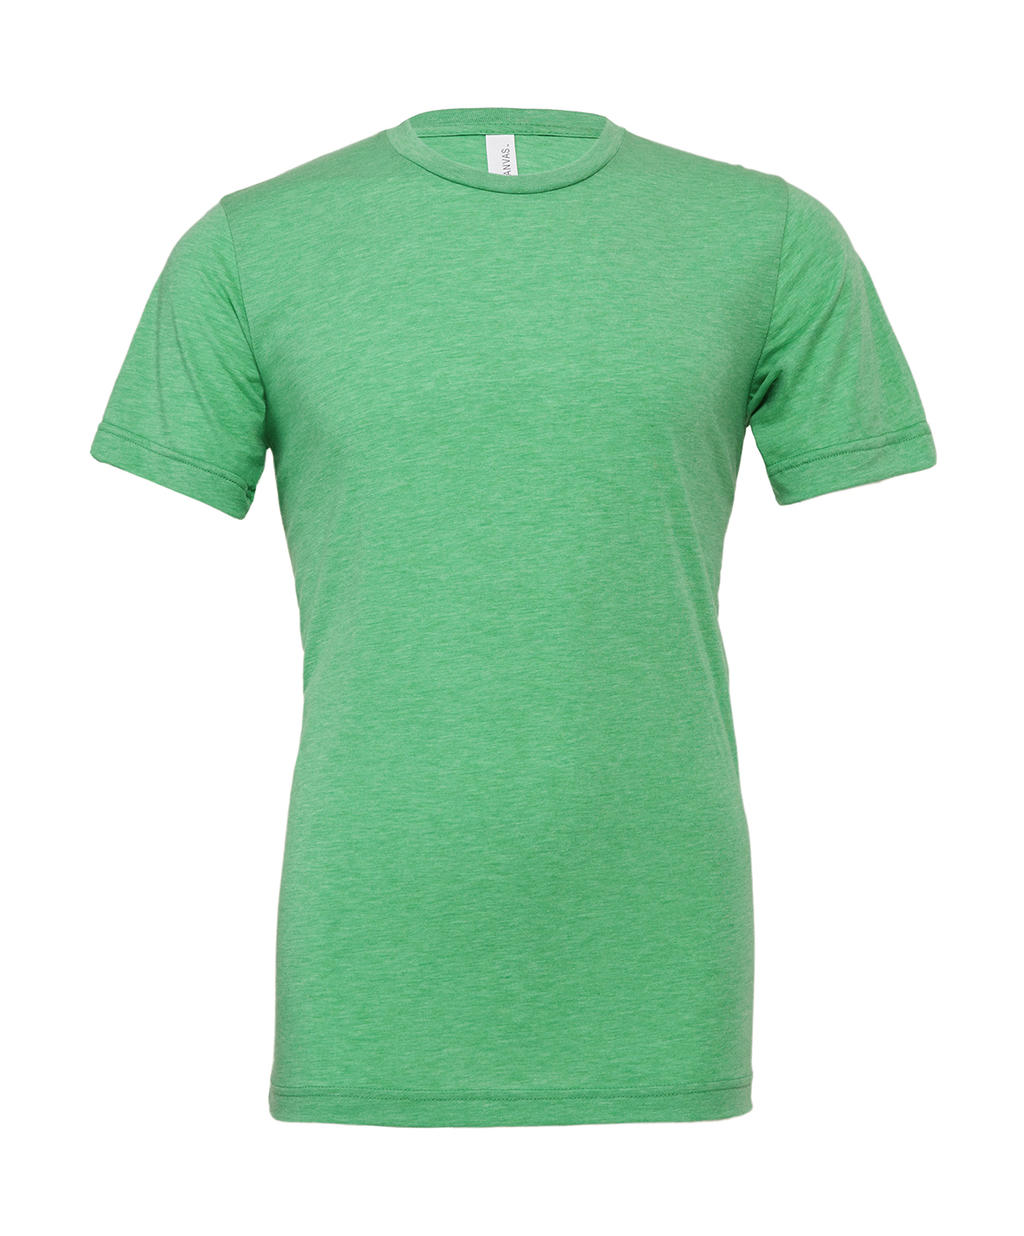  Unisex Triblend Short Sleeve Tee in Farbe Mint Triblend